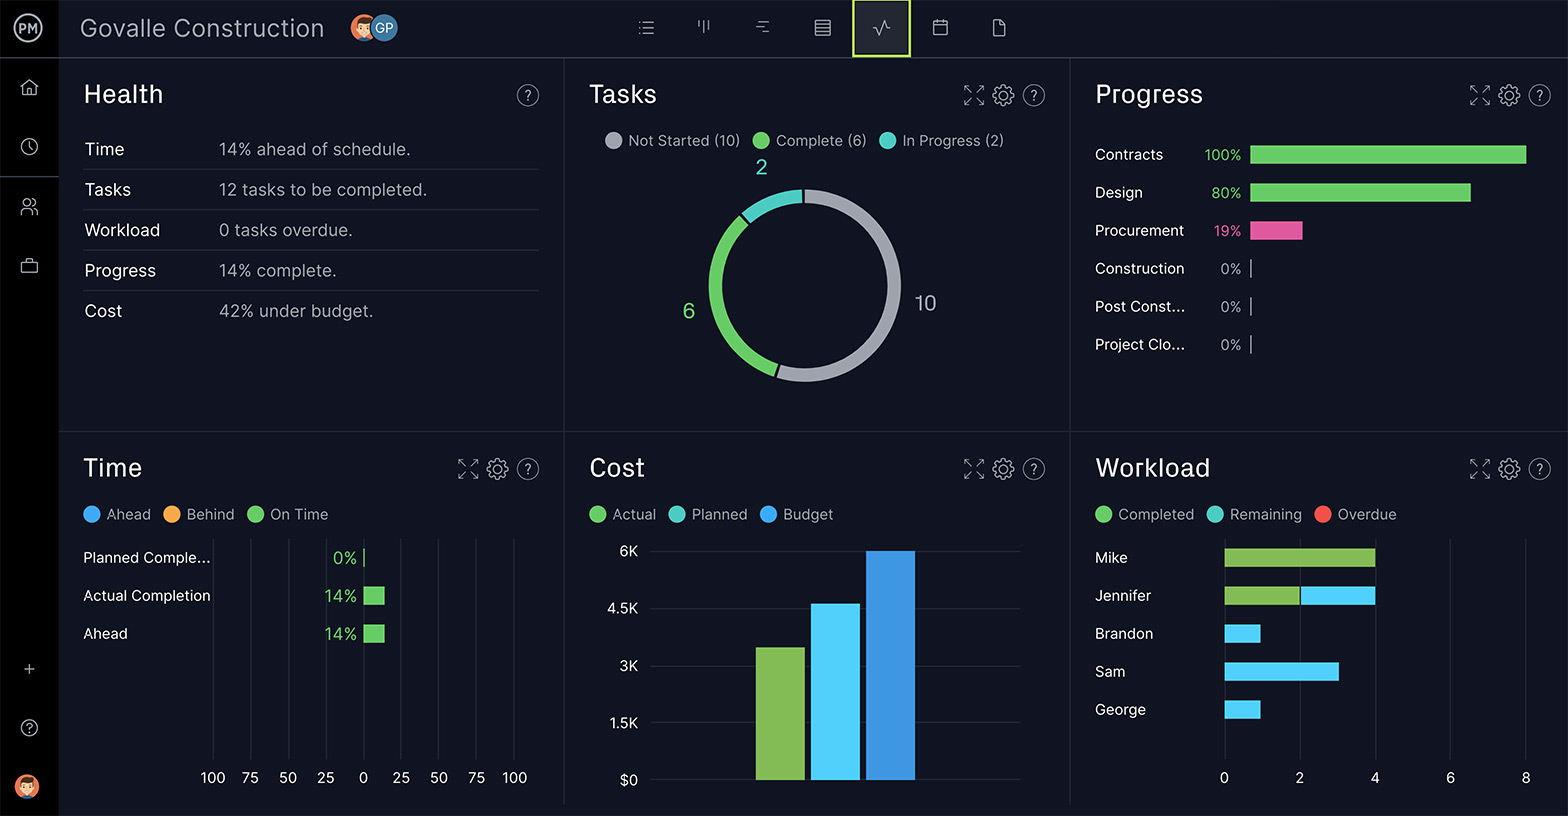 live dashboard from ProjectManager, a resource management software